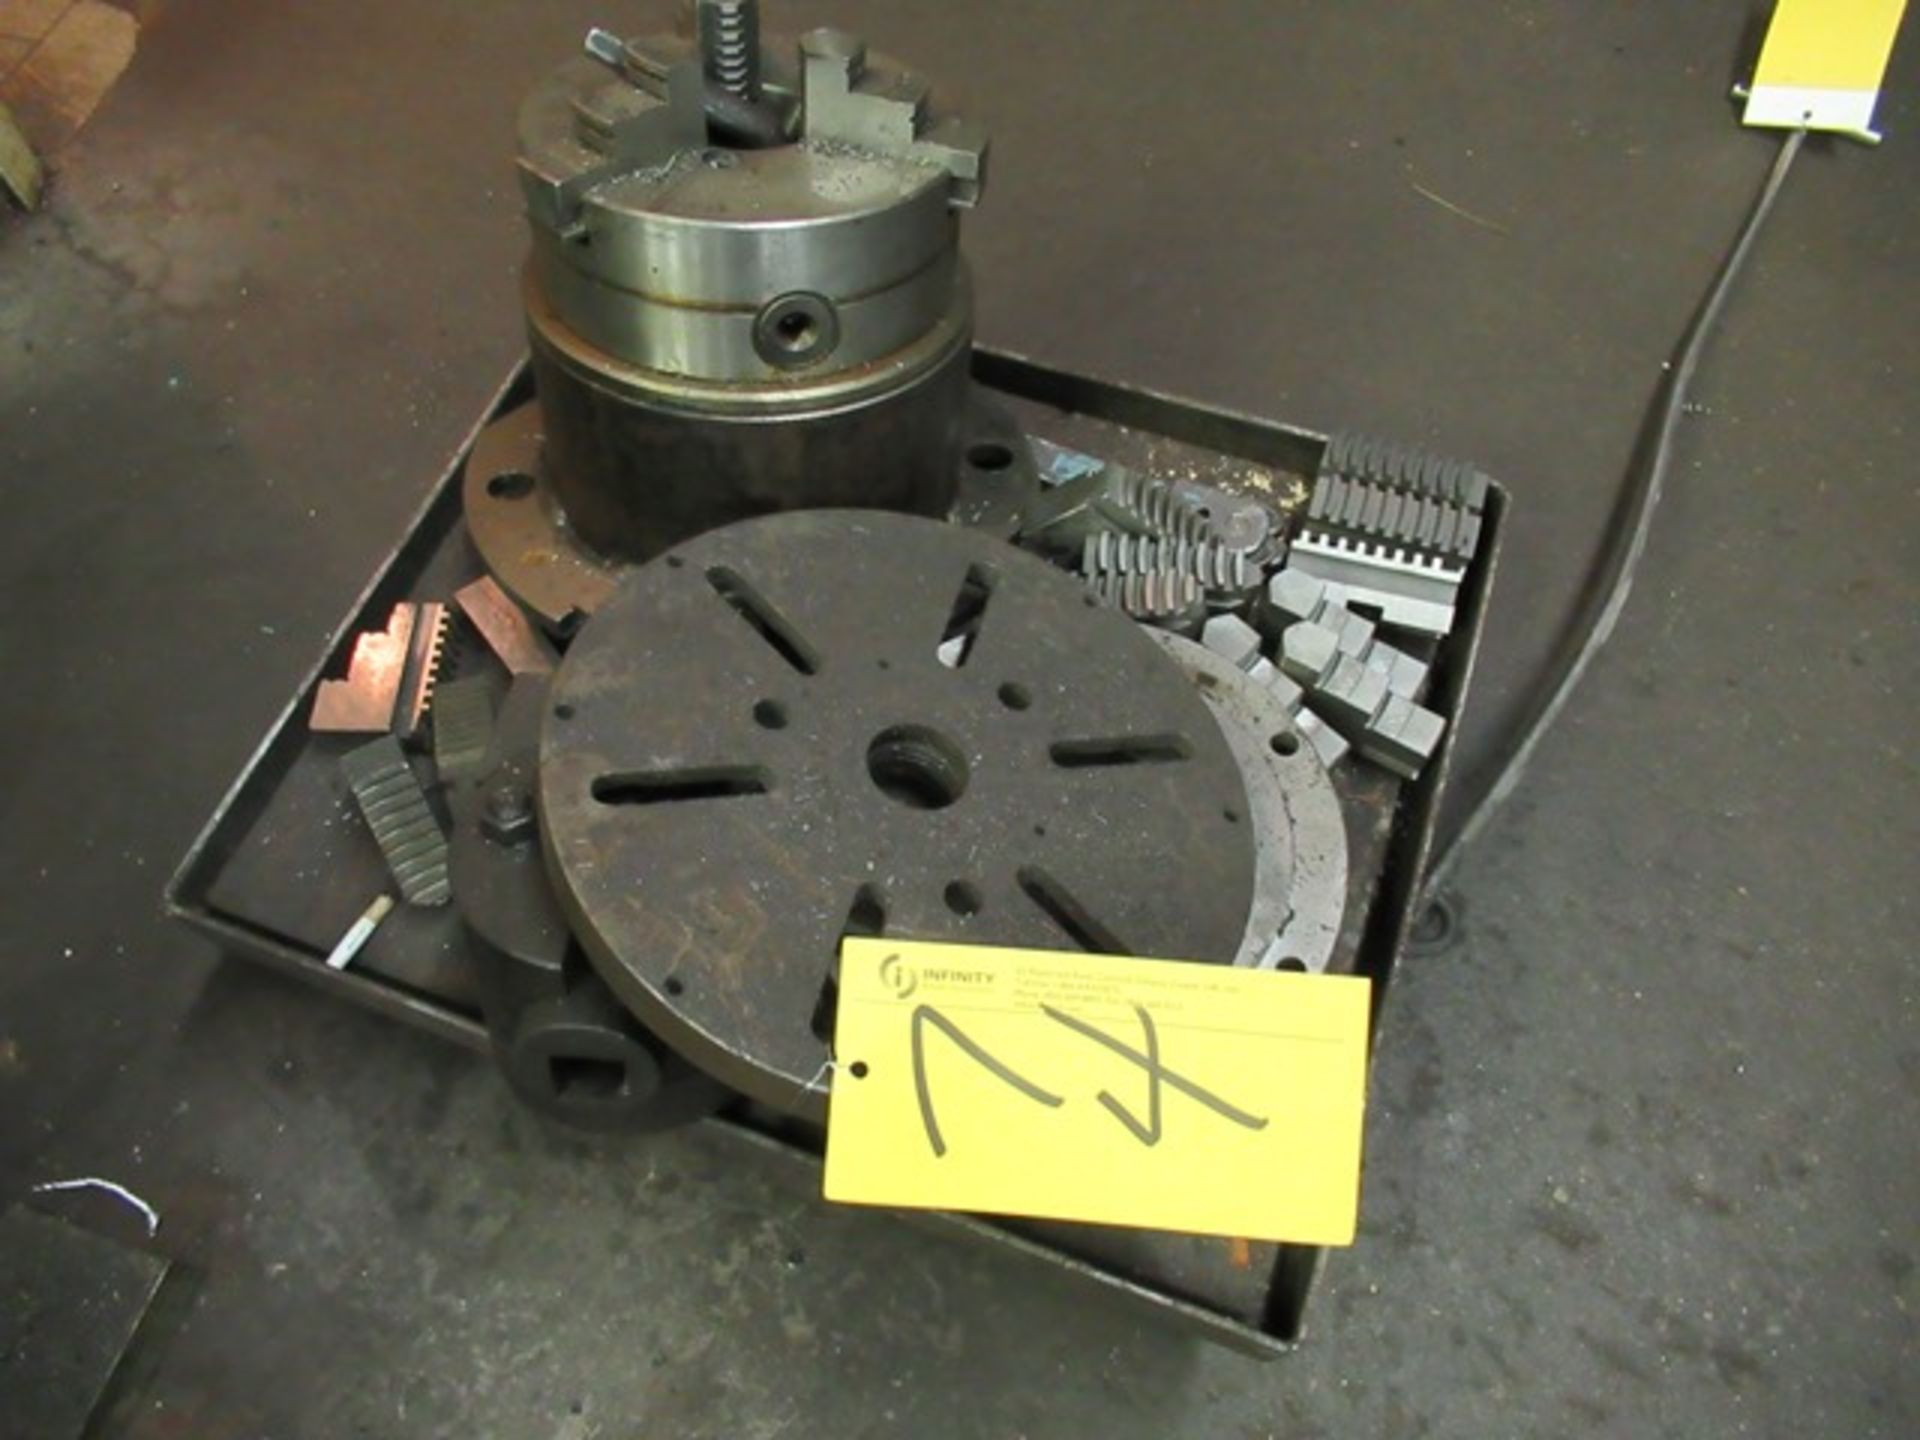 SIRCO PA-24, 3.5" ENGINE LATHE, 60" BETWEEN CENTERS, 24" SWING W/12" 3-JAW CHUCK, QUICK CHANGE - Image 4 of 4